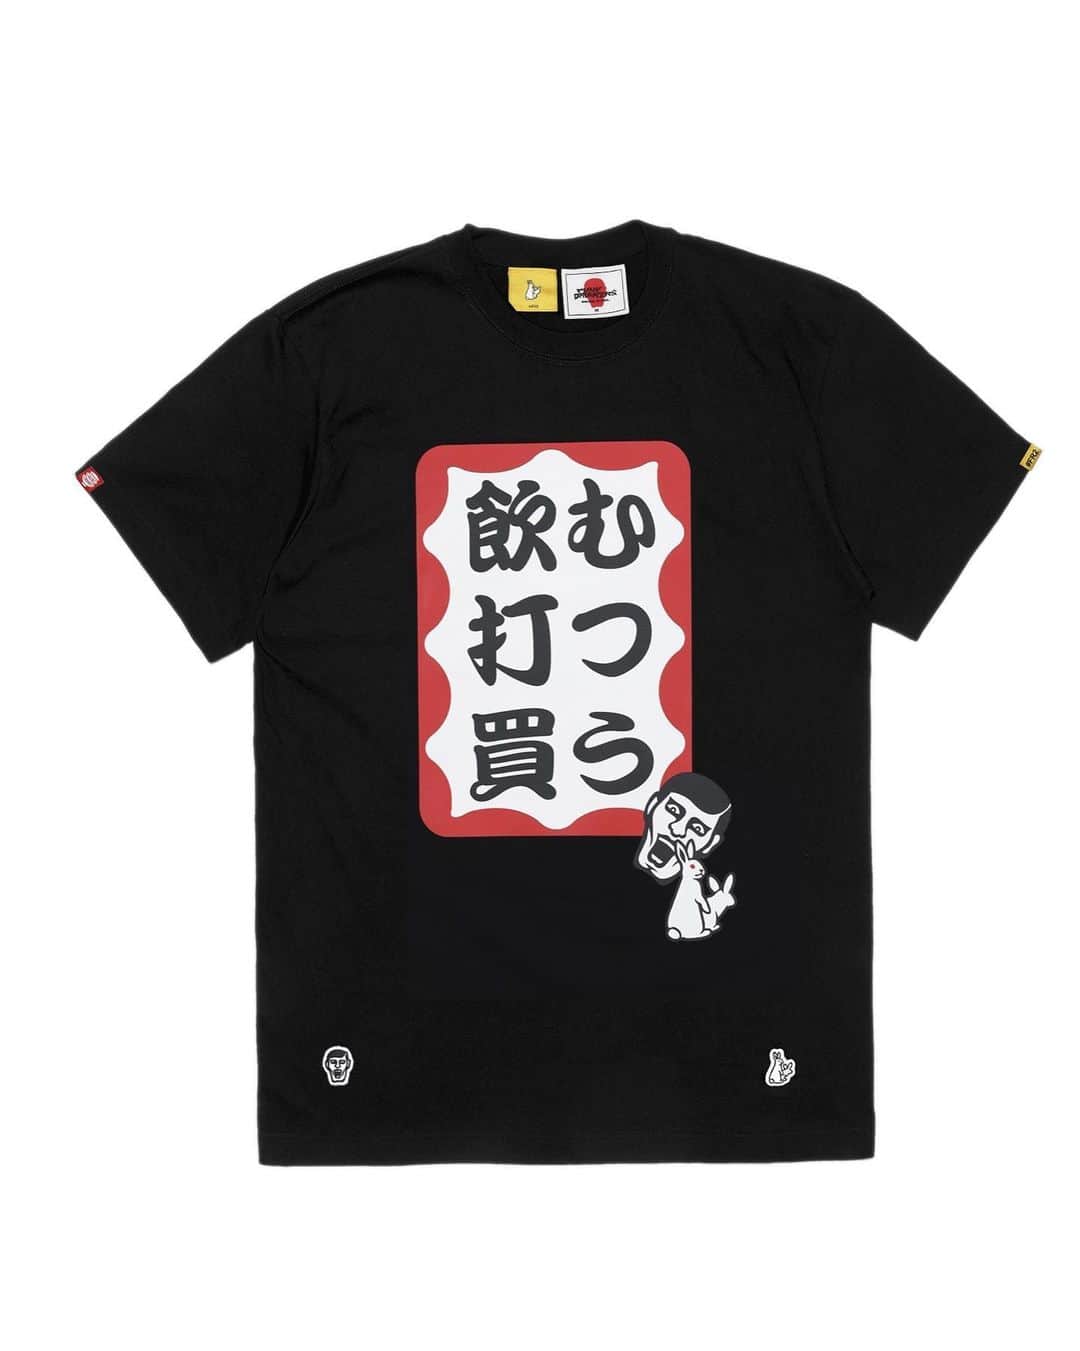 #FR2さんのインスタグラム写真 - (#FR2Instagram)「Collaboration items incorporating an UNCOOL IS COOL concept from #FR2 and made together with PUNK DRUNKERS will go on sale from Saturday, December 12th. Starting with shirts that feature PUNK DRUNKERS unmistakable "aitsu" character paired with #FR2's signature "Smoker's" design, a total of seven items will be released, including hoodies, long sleeve T-shirts, short sleeve T-shirts, and caps, as well as items that can be matched.   #FR2 はUNCOOL IS COOL【ダサイはカッコイー】をコンセプトに掲げる「PUNK DRUNKERS」とのコラボレーション商品を12月12日(土)から発売します。「PUNK DRUNKERS」の象徴ともいえる“あいつ”を、＃FR2 の代表デザインである「Smoker's」に落とし込んだTシャツをはじめ、セットアップでも着用できるアイテムやフーディー・ロンTとキャップの計7型をリリースいたします。    #FR2 與以「UNCOOL IS COOL」（俗就是酷）作為概念的「PUNK DRUNKERS」推出的聯名商品將於 12 月 12 日（六）開始販售。將可說是「PUNK DRUNKERS」靈魂象徵的「那傢伙」（AITSU）帶入 #FR2 的代名詞「Smoker's」的設計，以該款設計圖案的T恤為主，會推出可成套穿著的服飾及帽T、長袖T恤、T恤、棒球帽共七款商品。   #FR2 将UNCOOL IS COOL【土就是潮】作为理念与“PUNK DRUNKERS”合作推出的商品将于12月12日（周六）发售。  其中包括将可以说是“PUNK DRUNKERS”象征的“那个人”融入＃FR2 的代名词“Smoker's”设计而成的T恤、成套穿搭也可以搭配的单品、帽衫长T、帽子等7款新品。  #FPDR2#FR2#punkdrunkers」12月10日 20時47分 - fxxkingrabbits